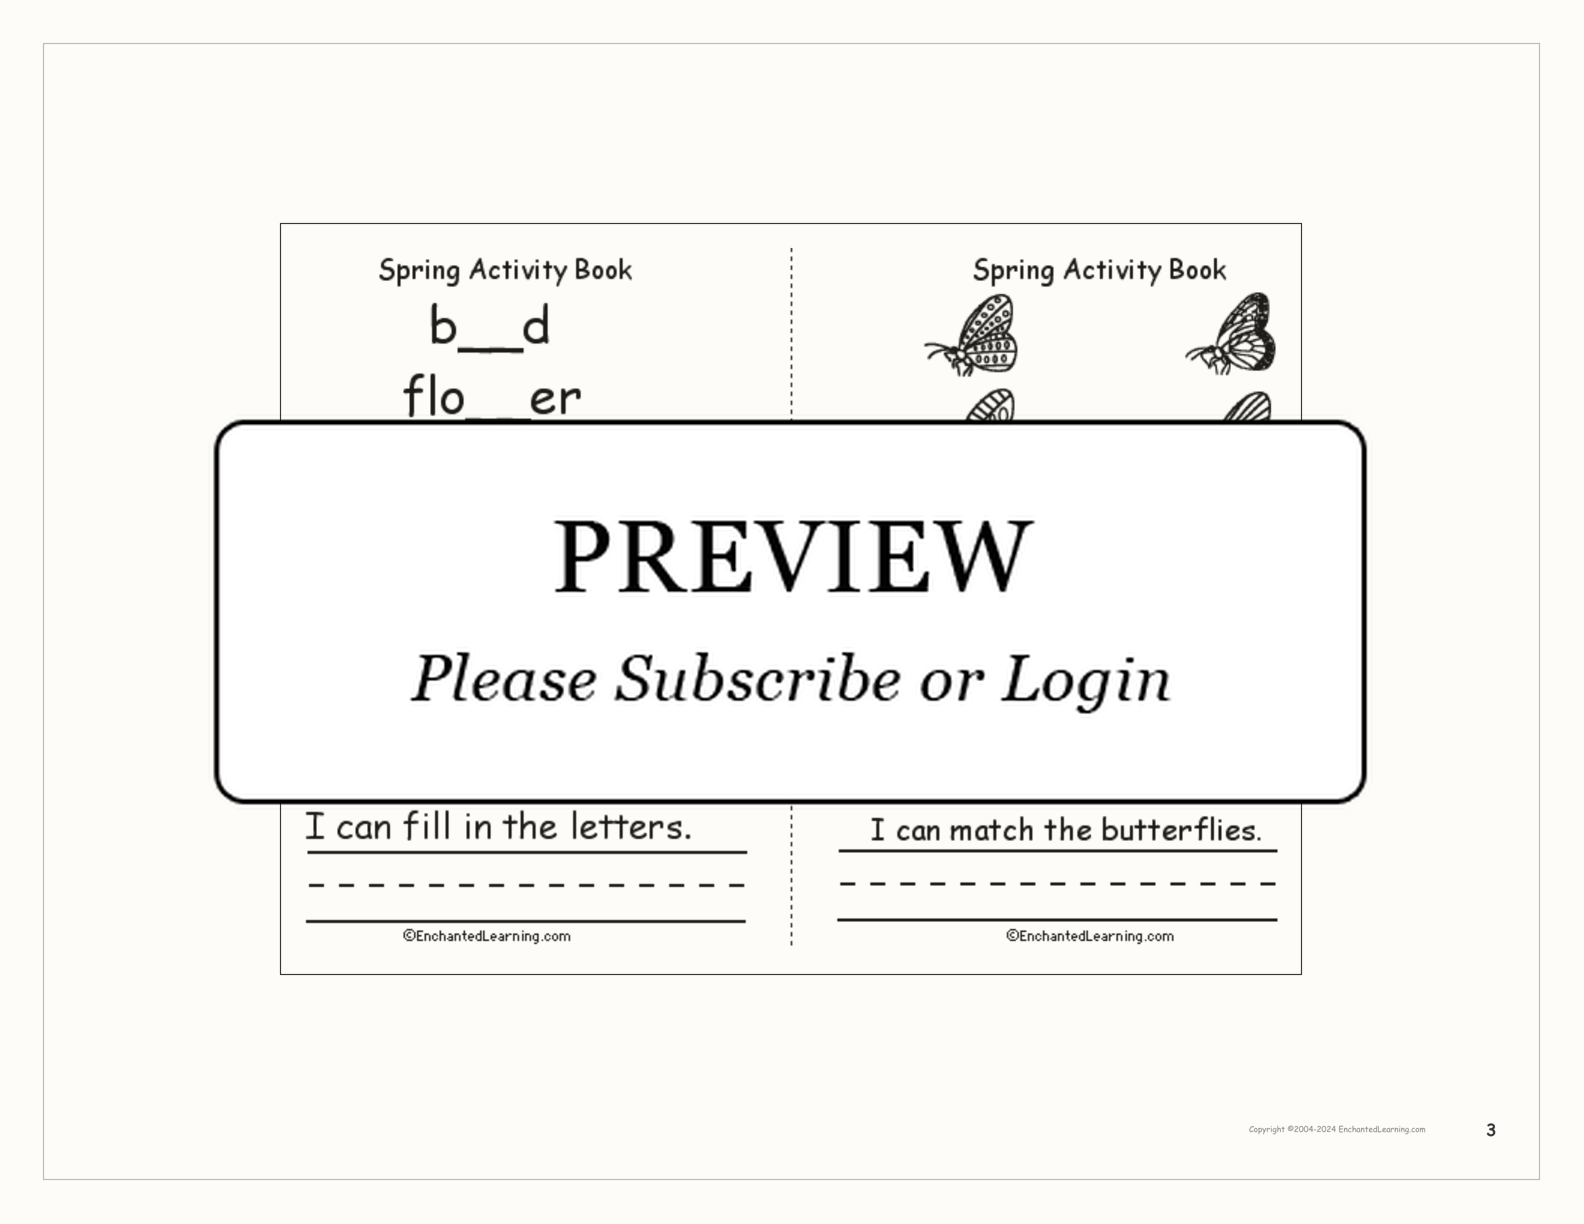 Spring Activity Book interactive worksheet page 3